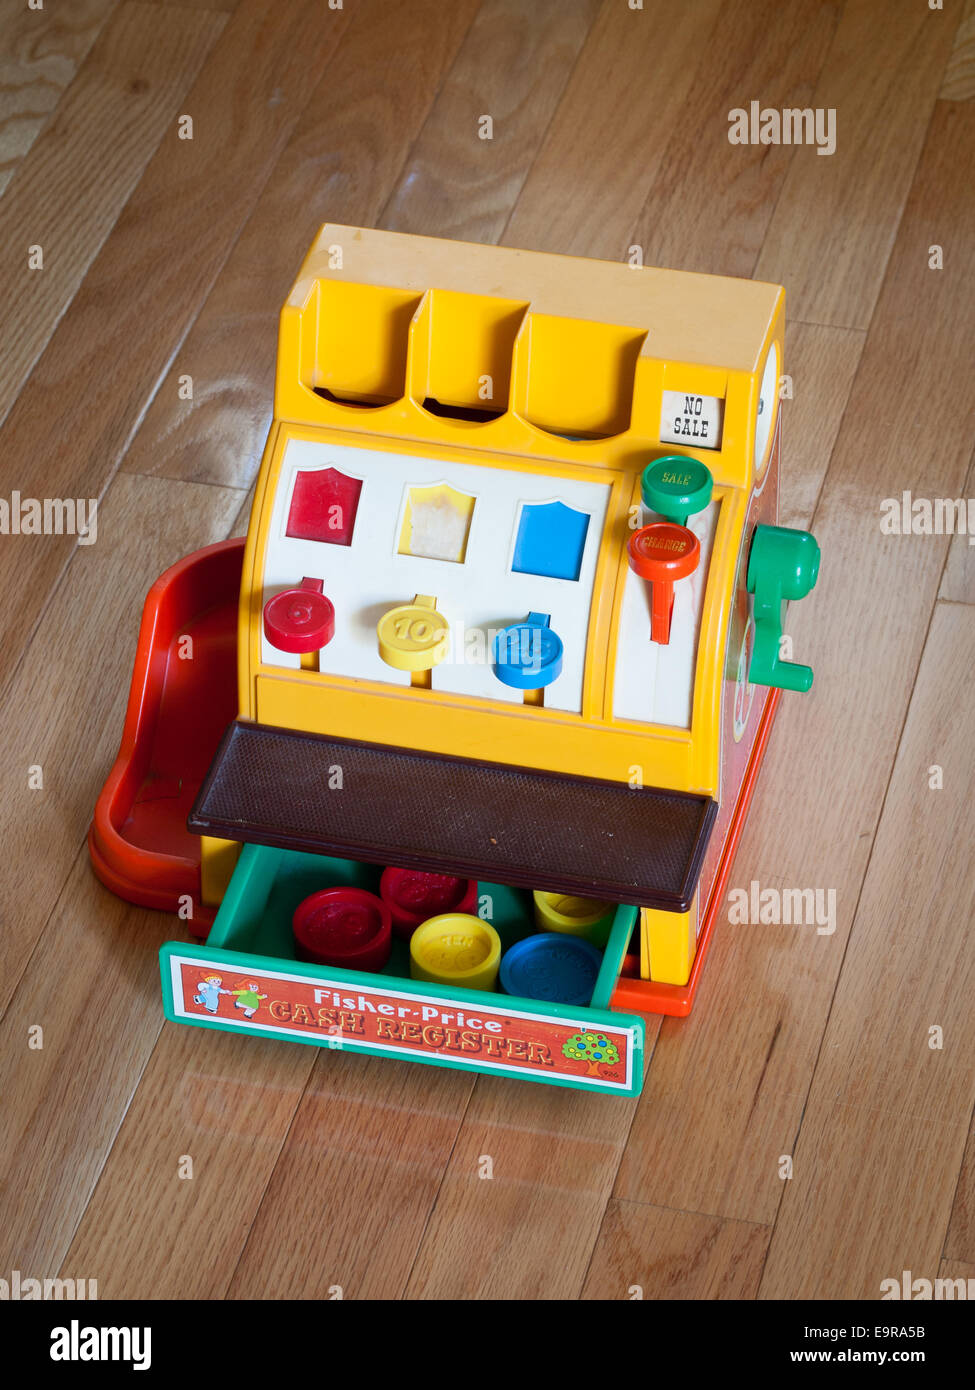 A vintage (circa 1980s) toy Fisher-Price cash register. Stock Photo